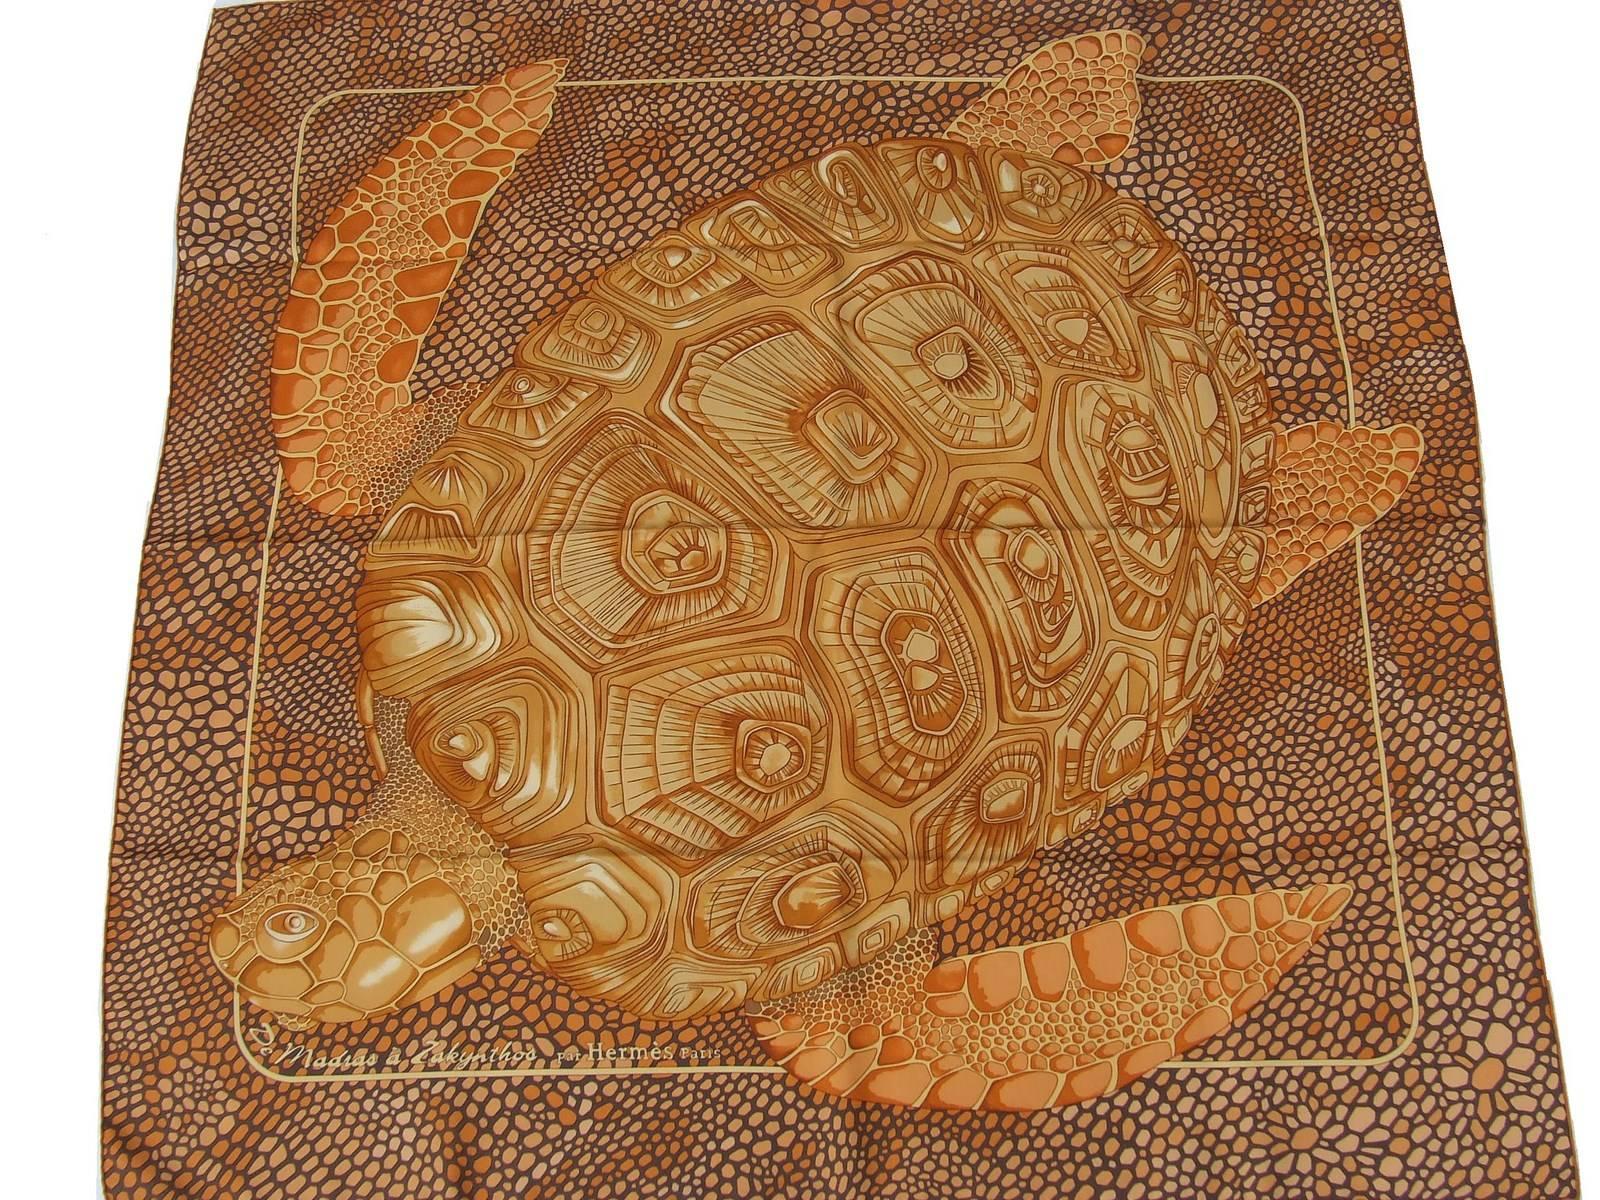 Amazing and Gorgeous Authentic Hermes Scarf

Rare and hard to find !

Title: De Madras A Zakynthos

Pattern: turtle and tortoiseshell

Made in France

Designed by Dominik Jarlegant in 2009

Made of 100% Silk

Colorways: Orange, Beige,